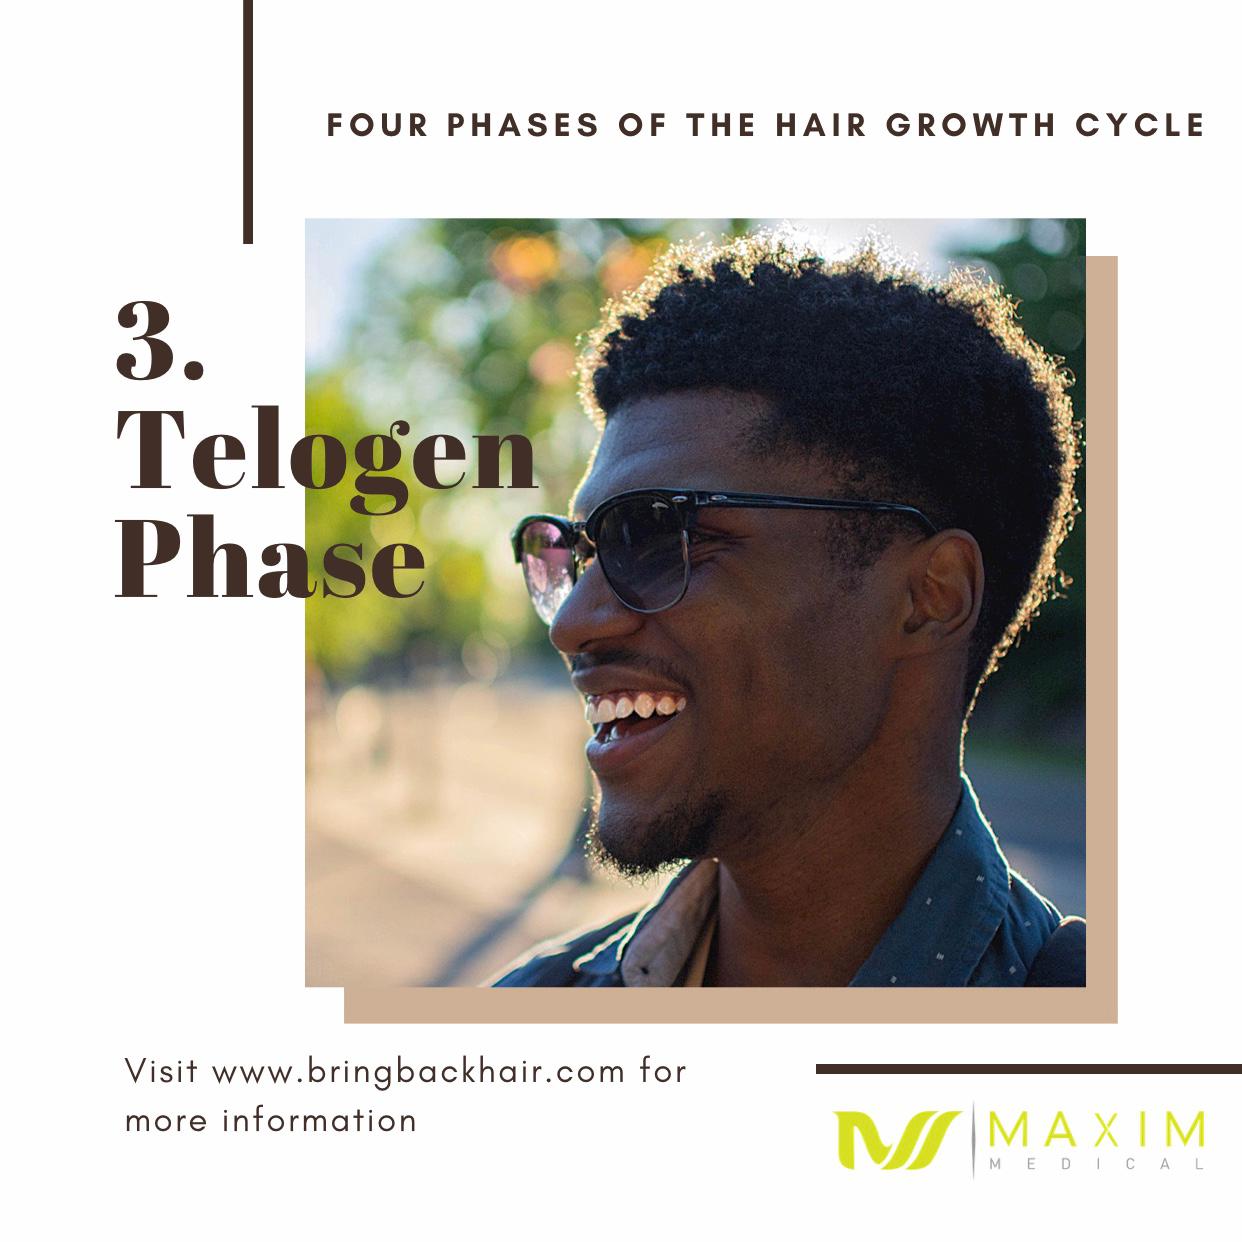 3. Telogen Phase
The Telogen phase is where the hair follicle rests for approximately 3 months before starting the Anagen phase again. In rare circumstances, people can suffer what is known as Telogen Effluvium. This is the noticeable thinning caused by long severe daily shedding periods and a longer telogen phase. Causes for this can range from factors such as a poor diet, stress, deficiencies in vitamins and minerals, or a combination of all of the above. However, usually after three months, the Exogen Phase will start.